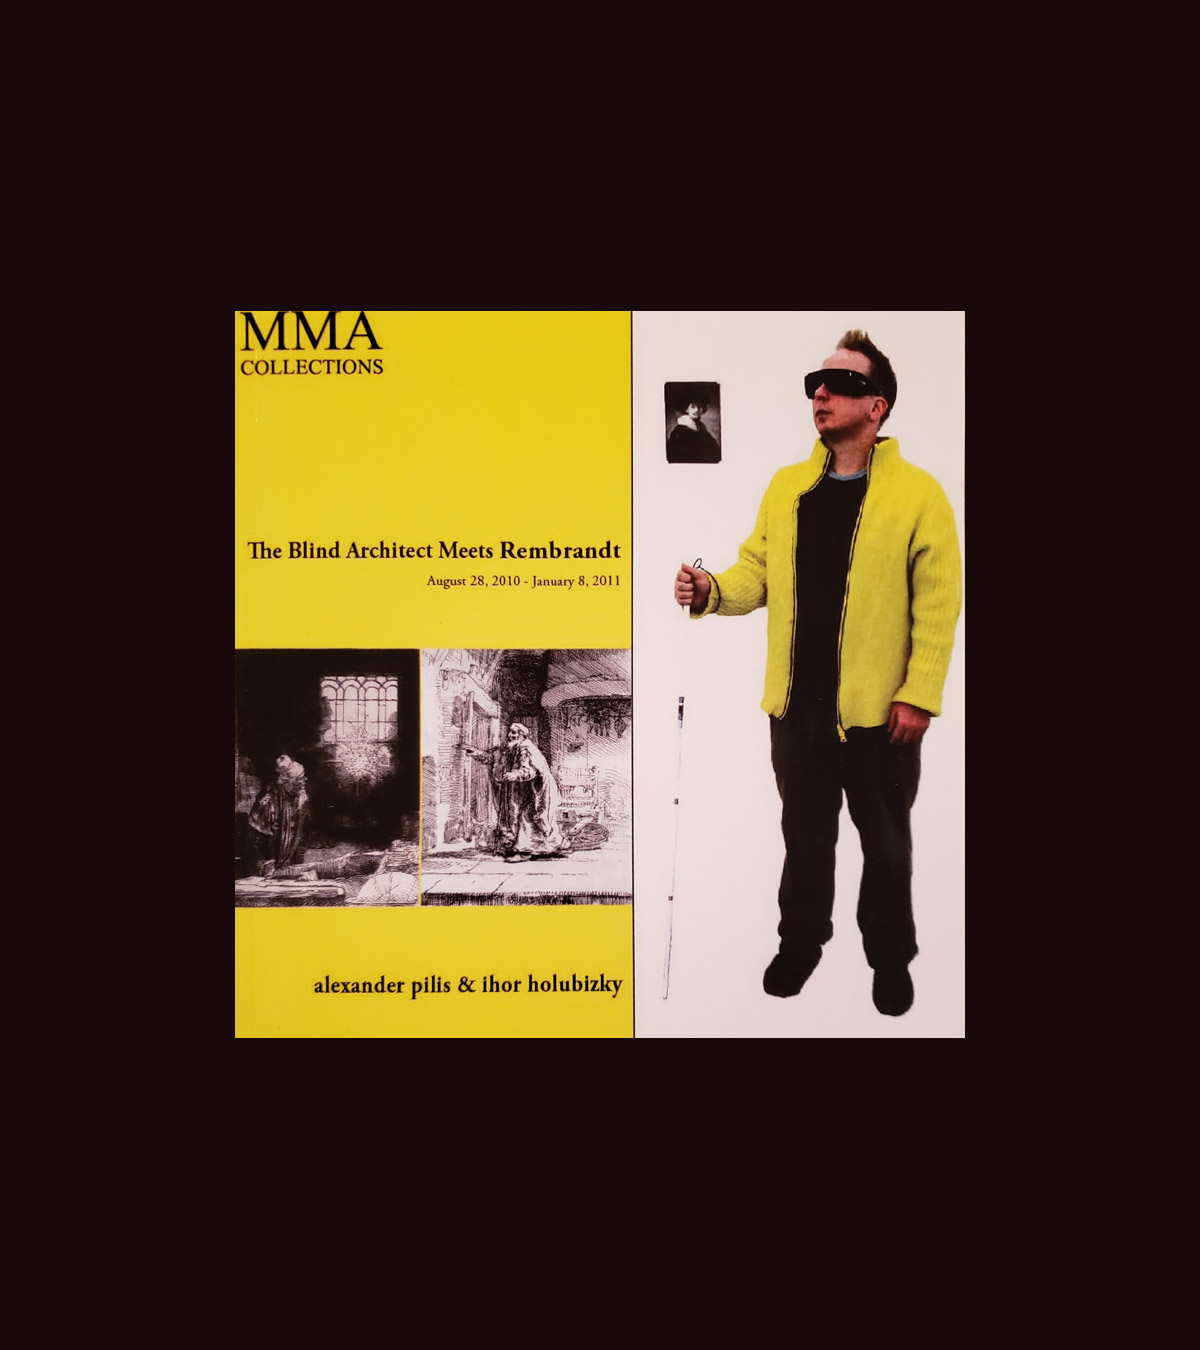 Yellow book cover with black title, at right there is an image of a man wearing glasses and using a walking stick